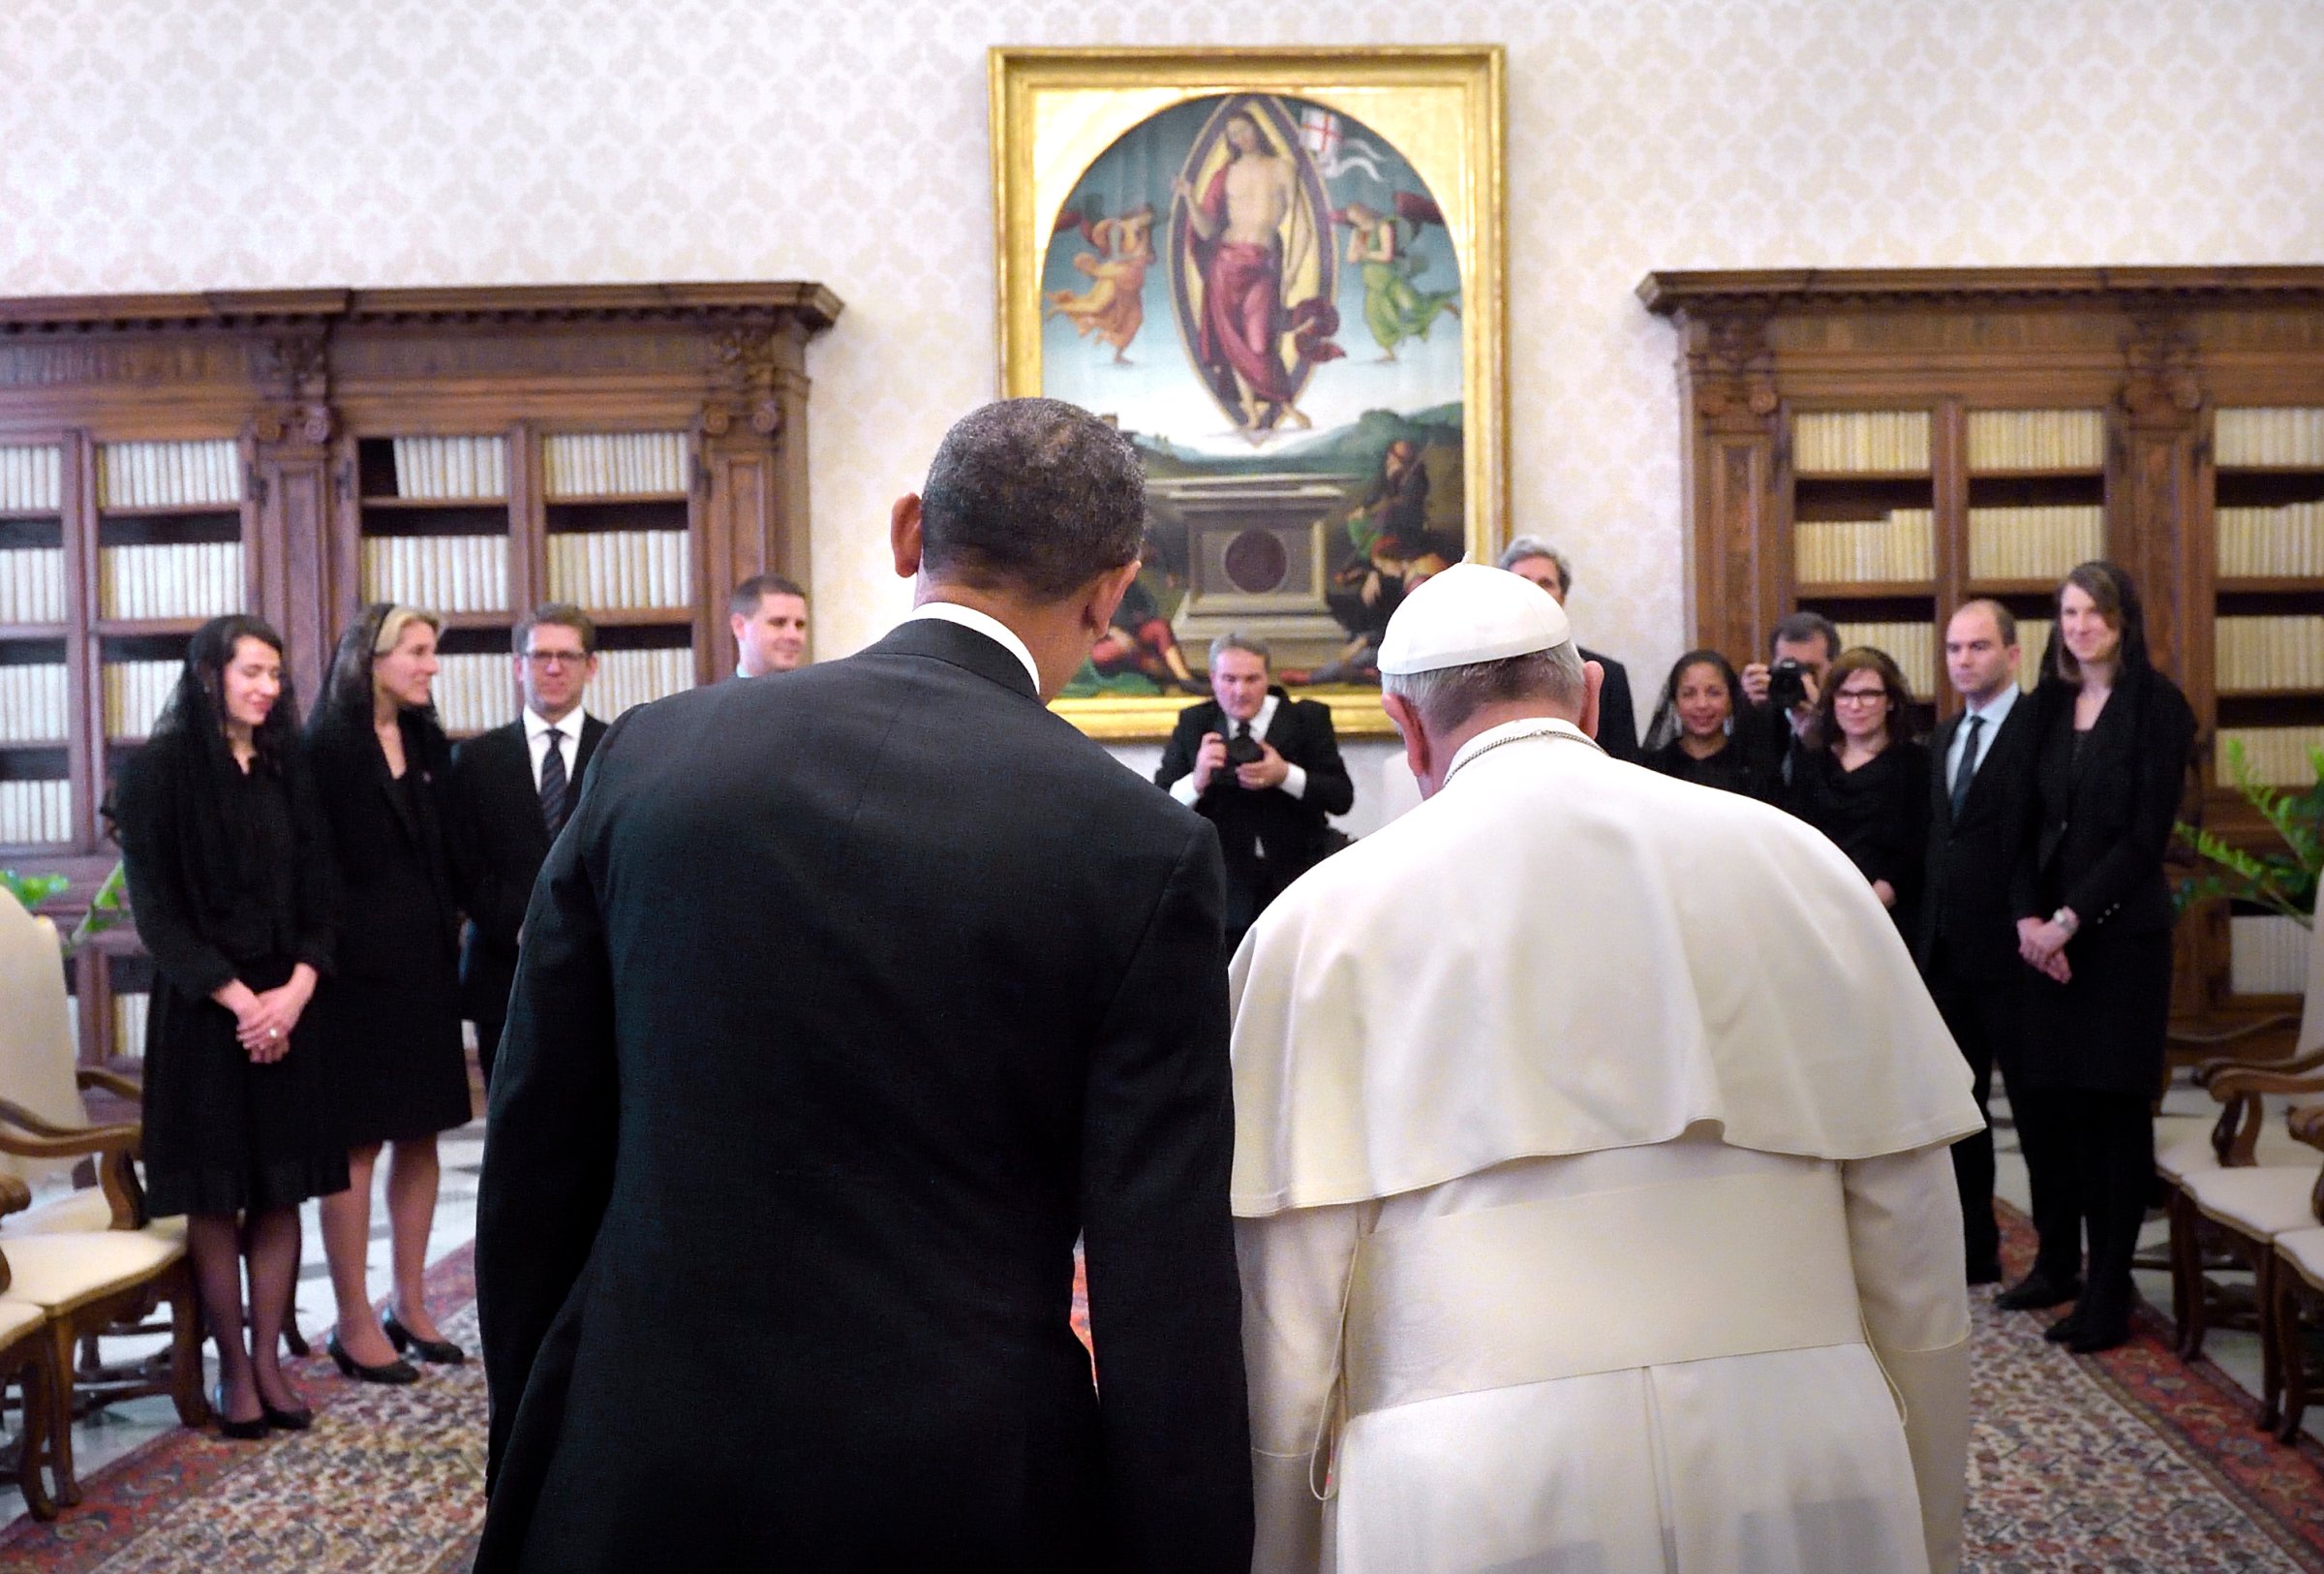 U.S. President Barack Obama speaks with Pope Francis during their meeting at the Vatican March 27, 2014.